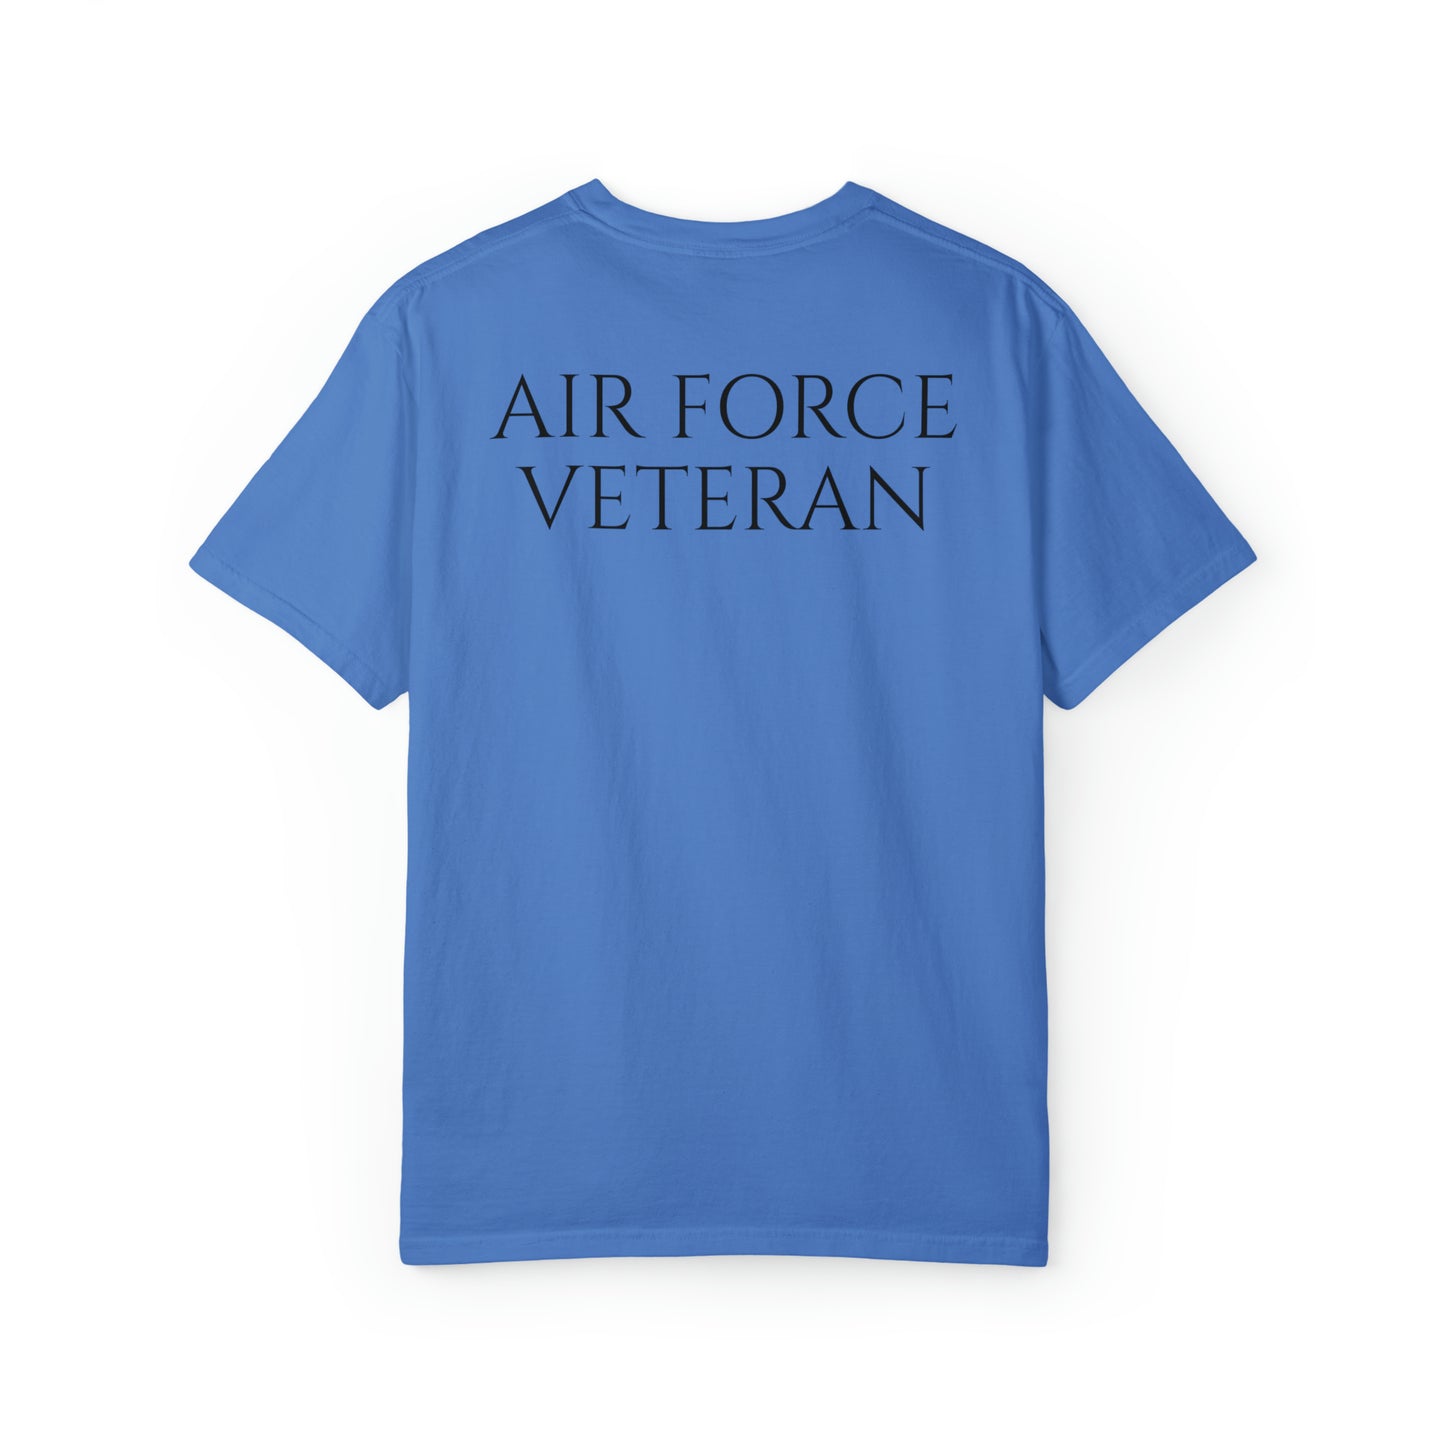 Choose Your Military Branch! T-shirt